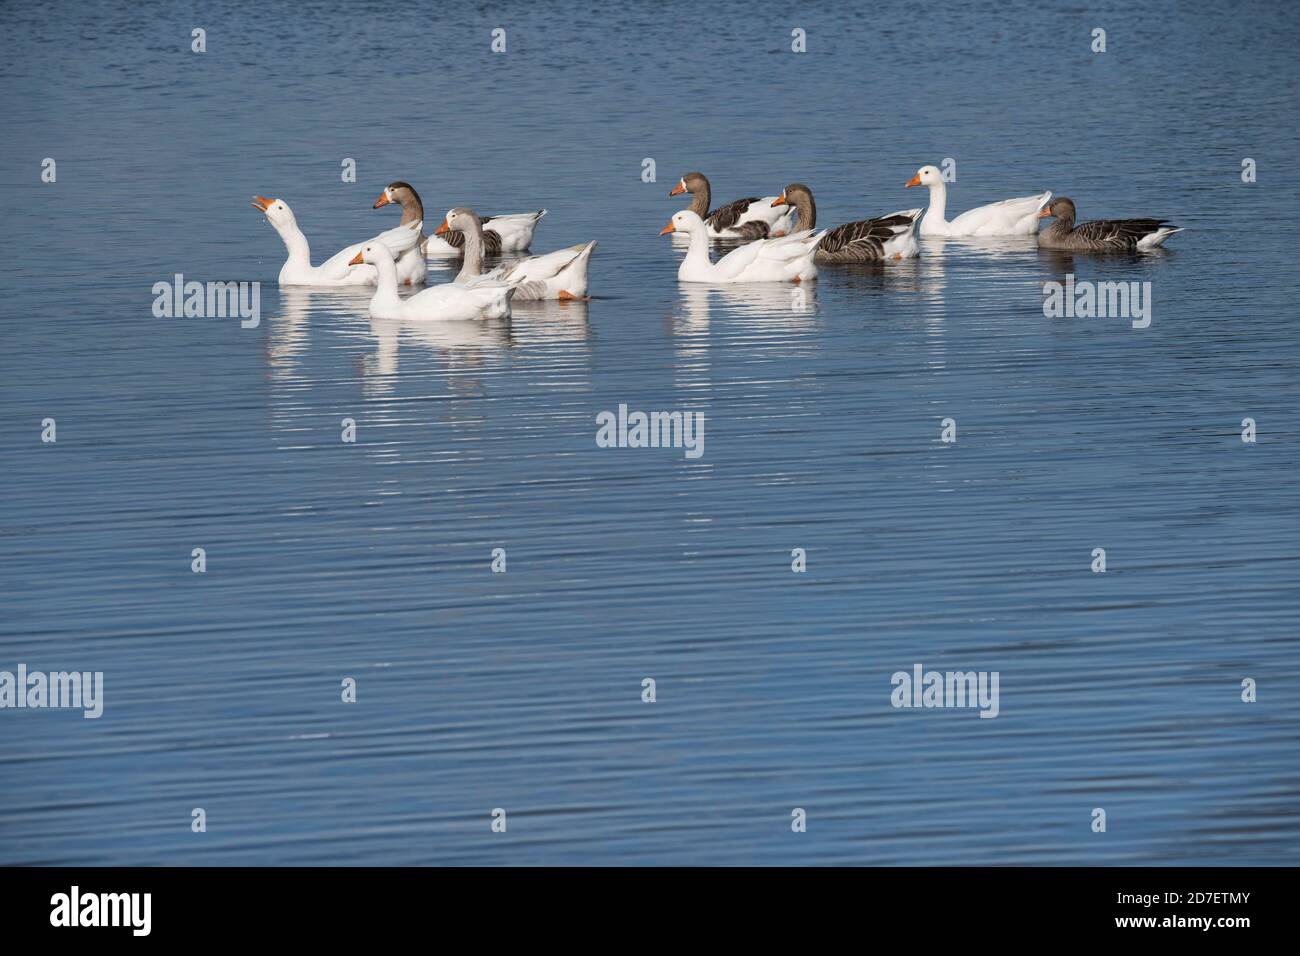 Group of white and spotted farm geese lit by the sun and reflected in the water. Space for text on the water Stock Photo